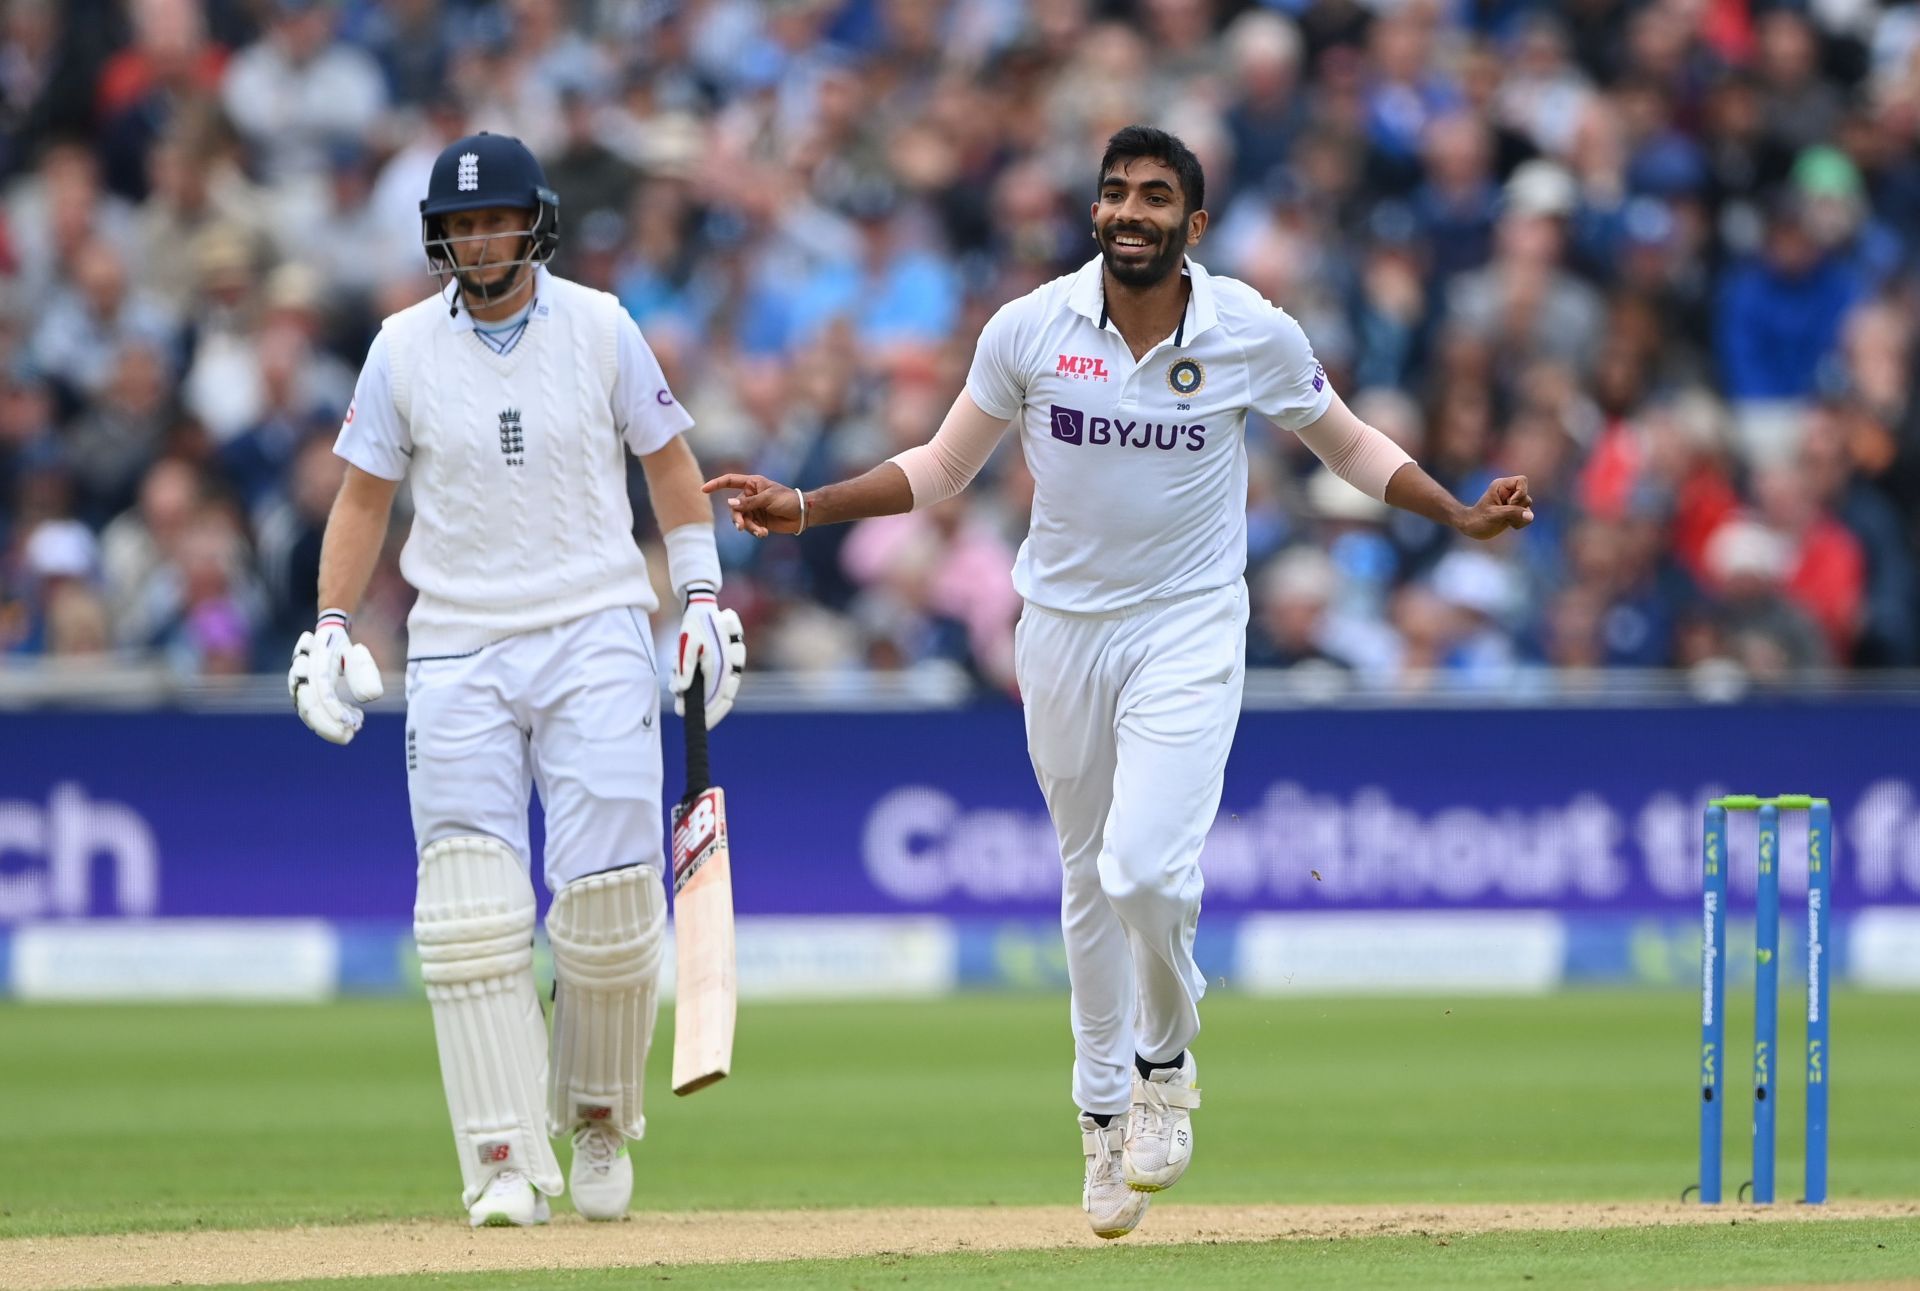 Jasprit Bumrah celebrates after taking the wicket of Ollie Pope. Pic: Getty Images